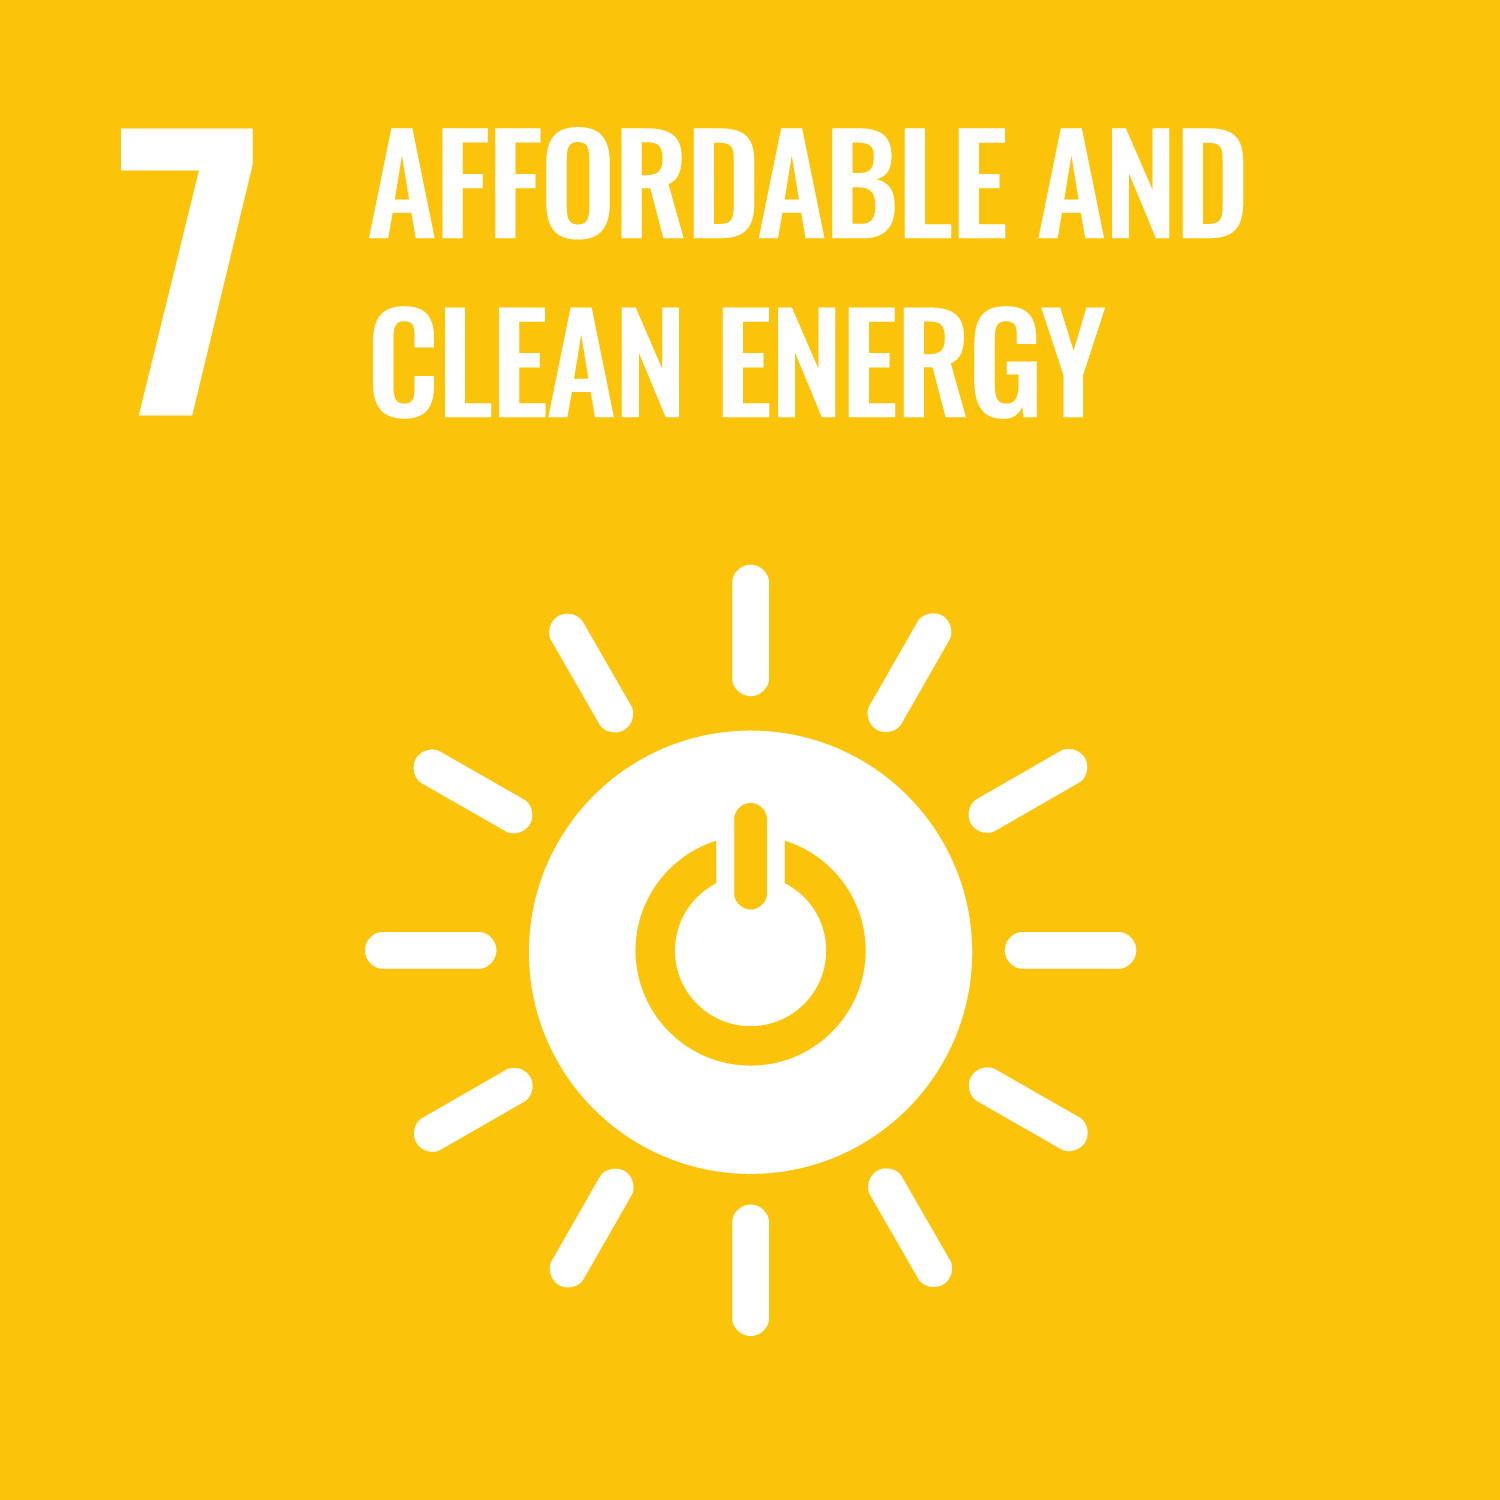 UN sustainable development goal number 7 Affordable and clean energy. Link to goal number 7.